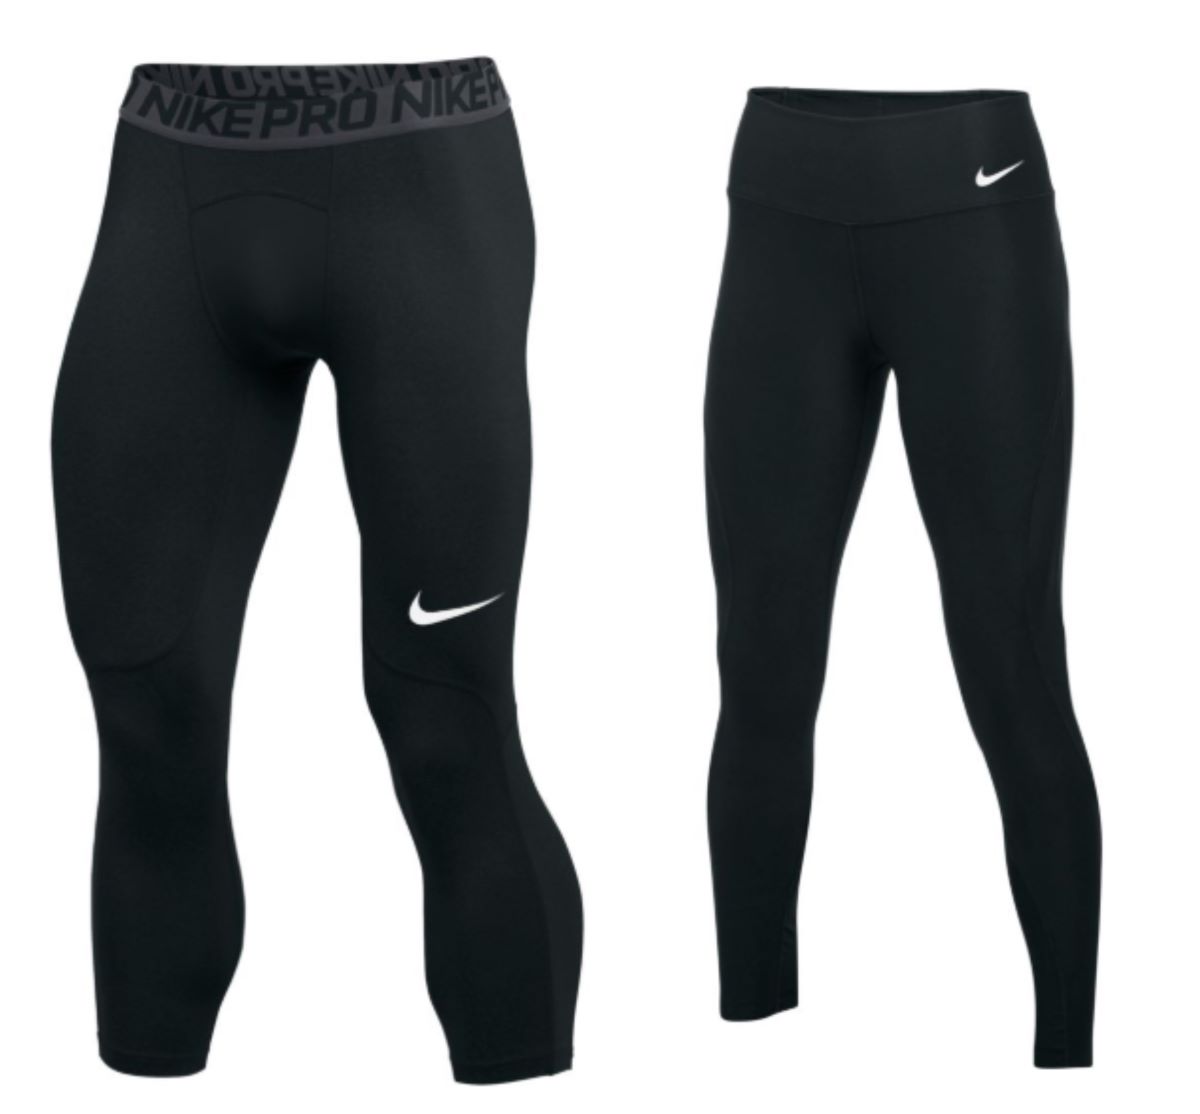 Nike Compression Athletic Leggings for Women